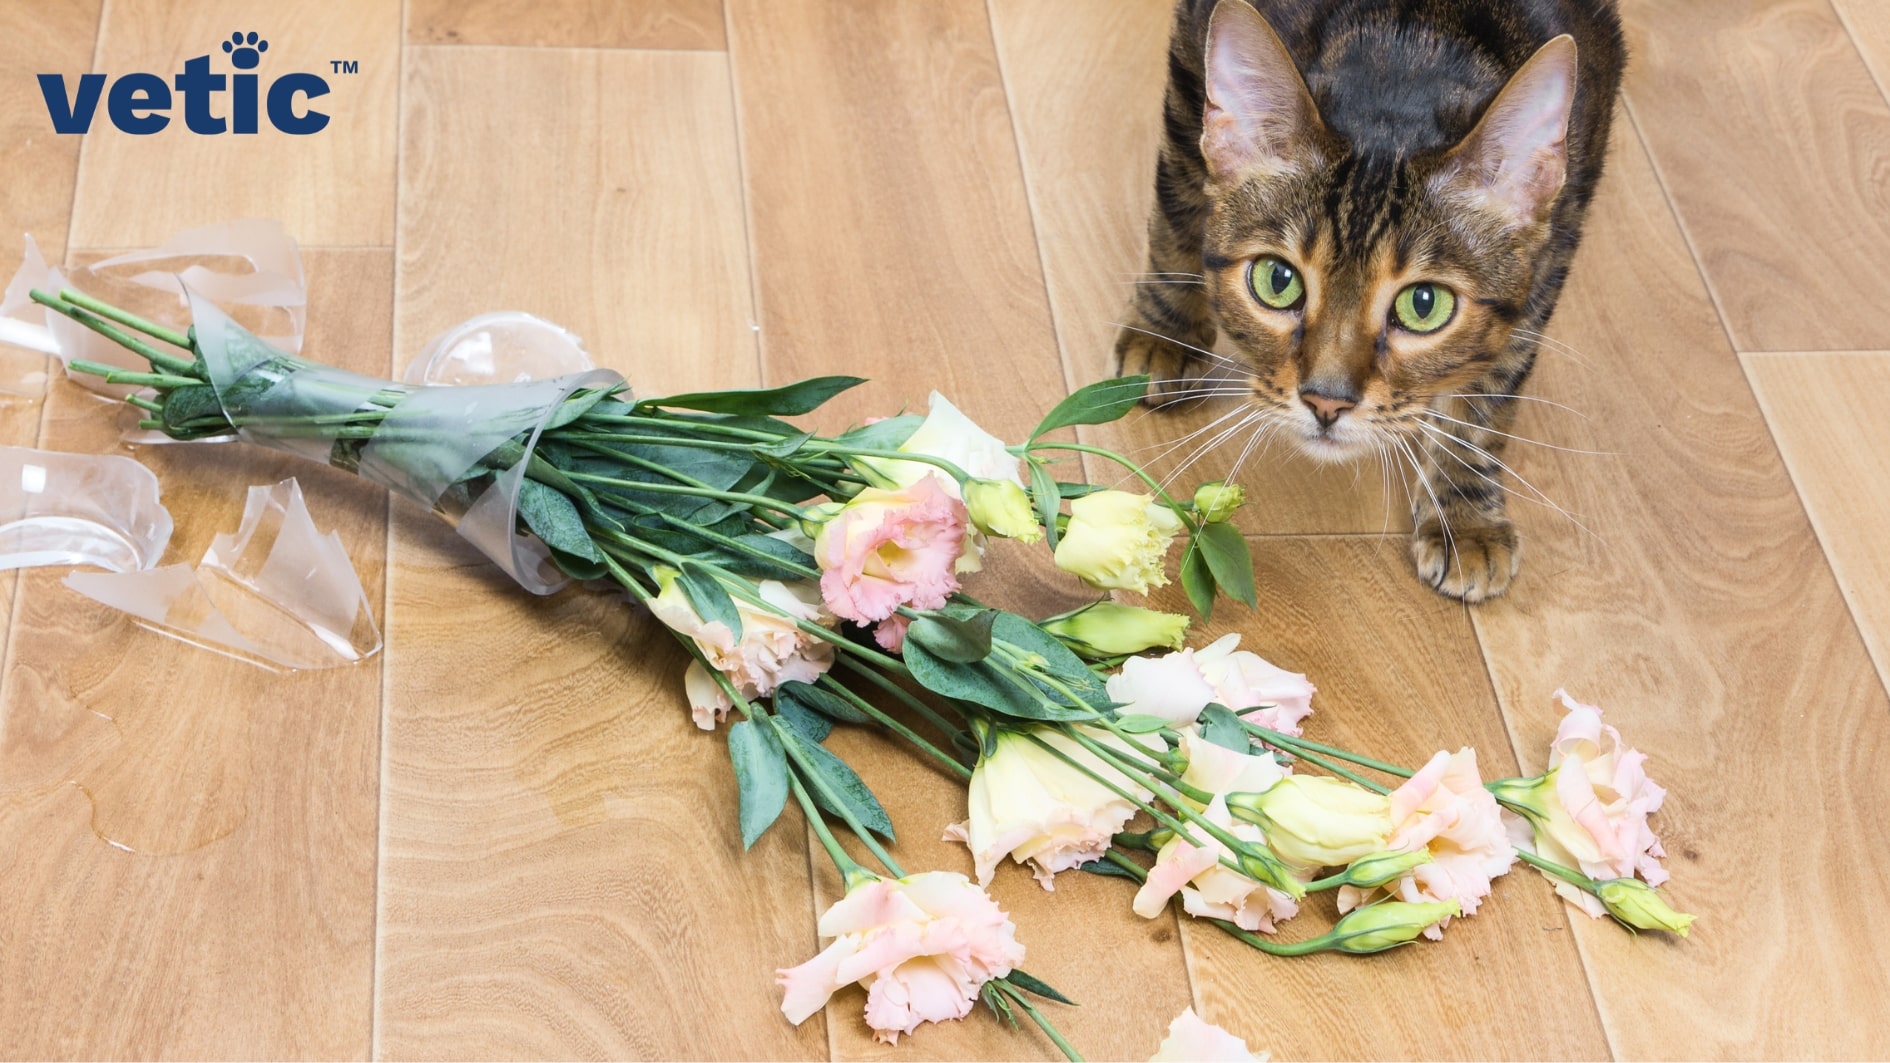 a mackerel cat looks up at the camera while a broken flower vase lay in front of him along with the fresh flowers it contained. accidents like this can happen when new cat owners do not cat-proof their house